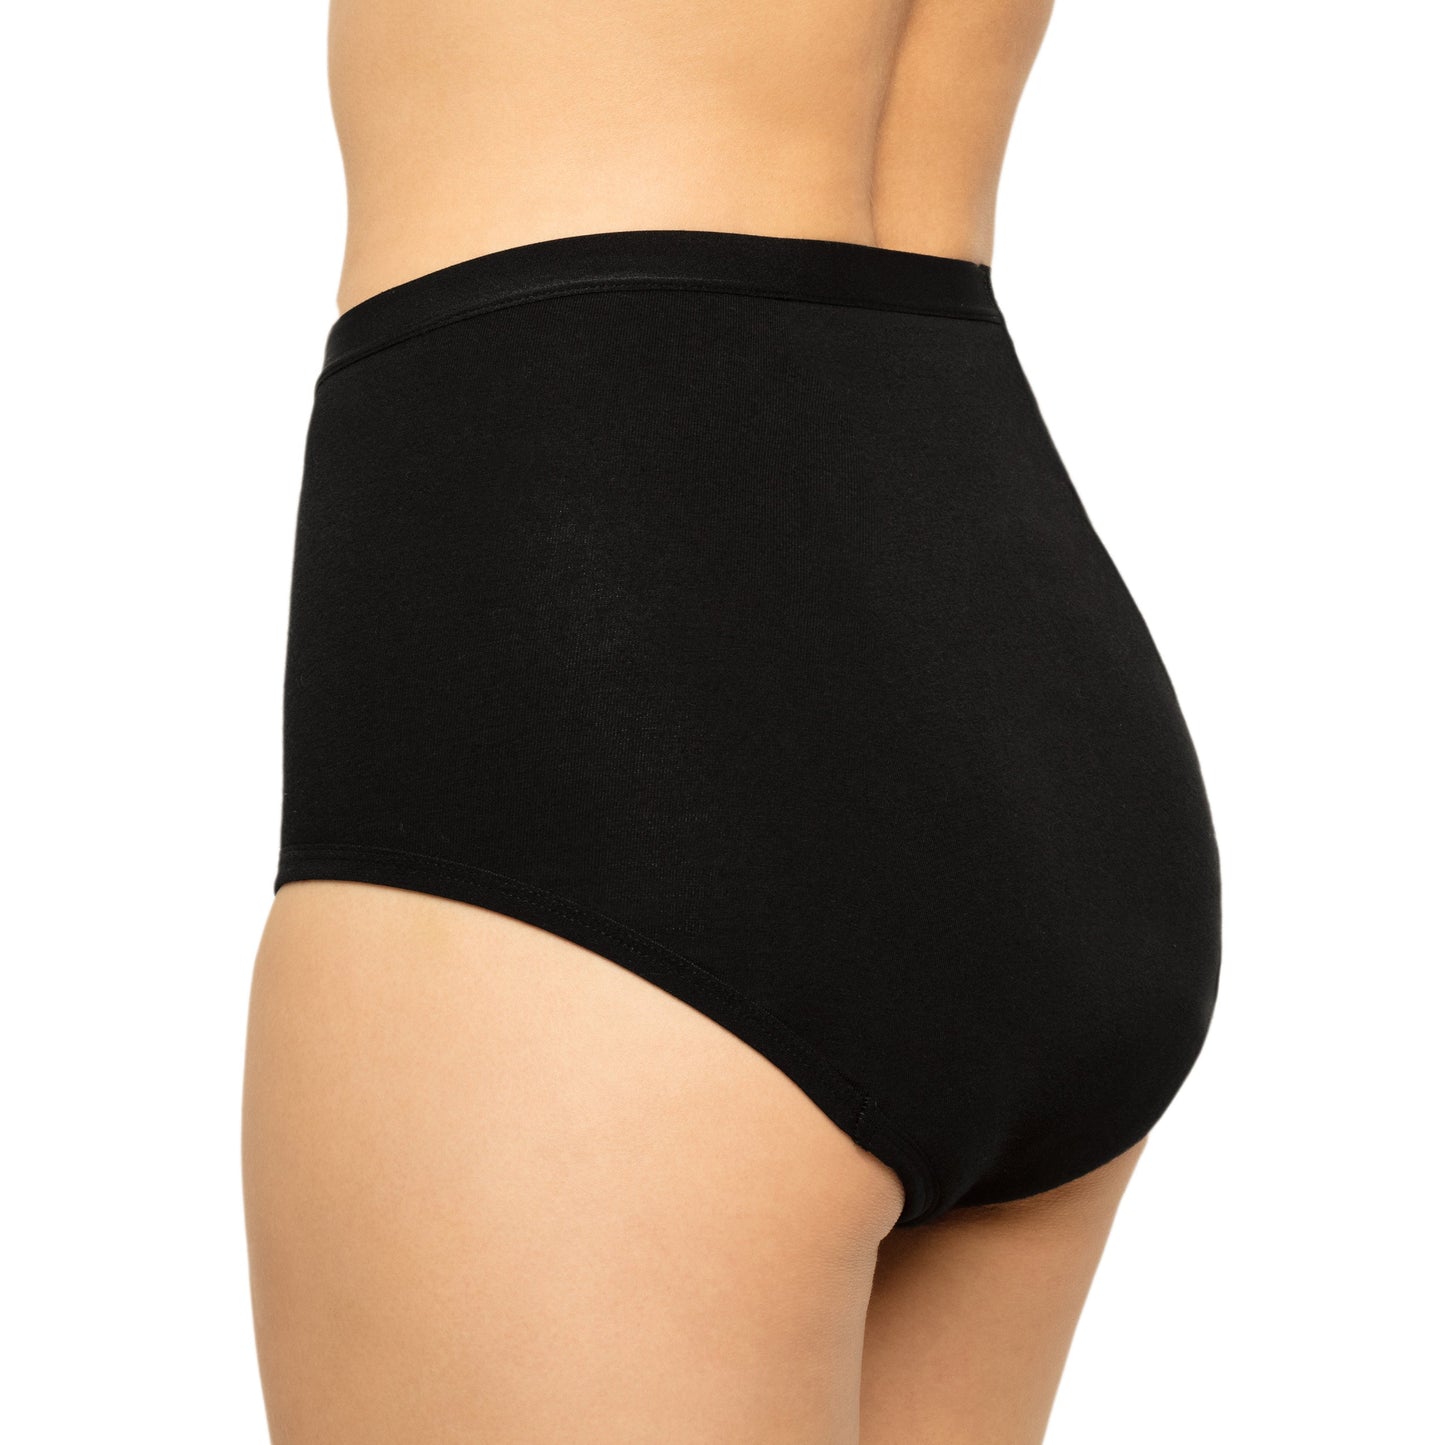 The High Waisted Period. in Organic Cotton For Heavy Flows. XS - 6XL